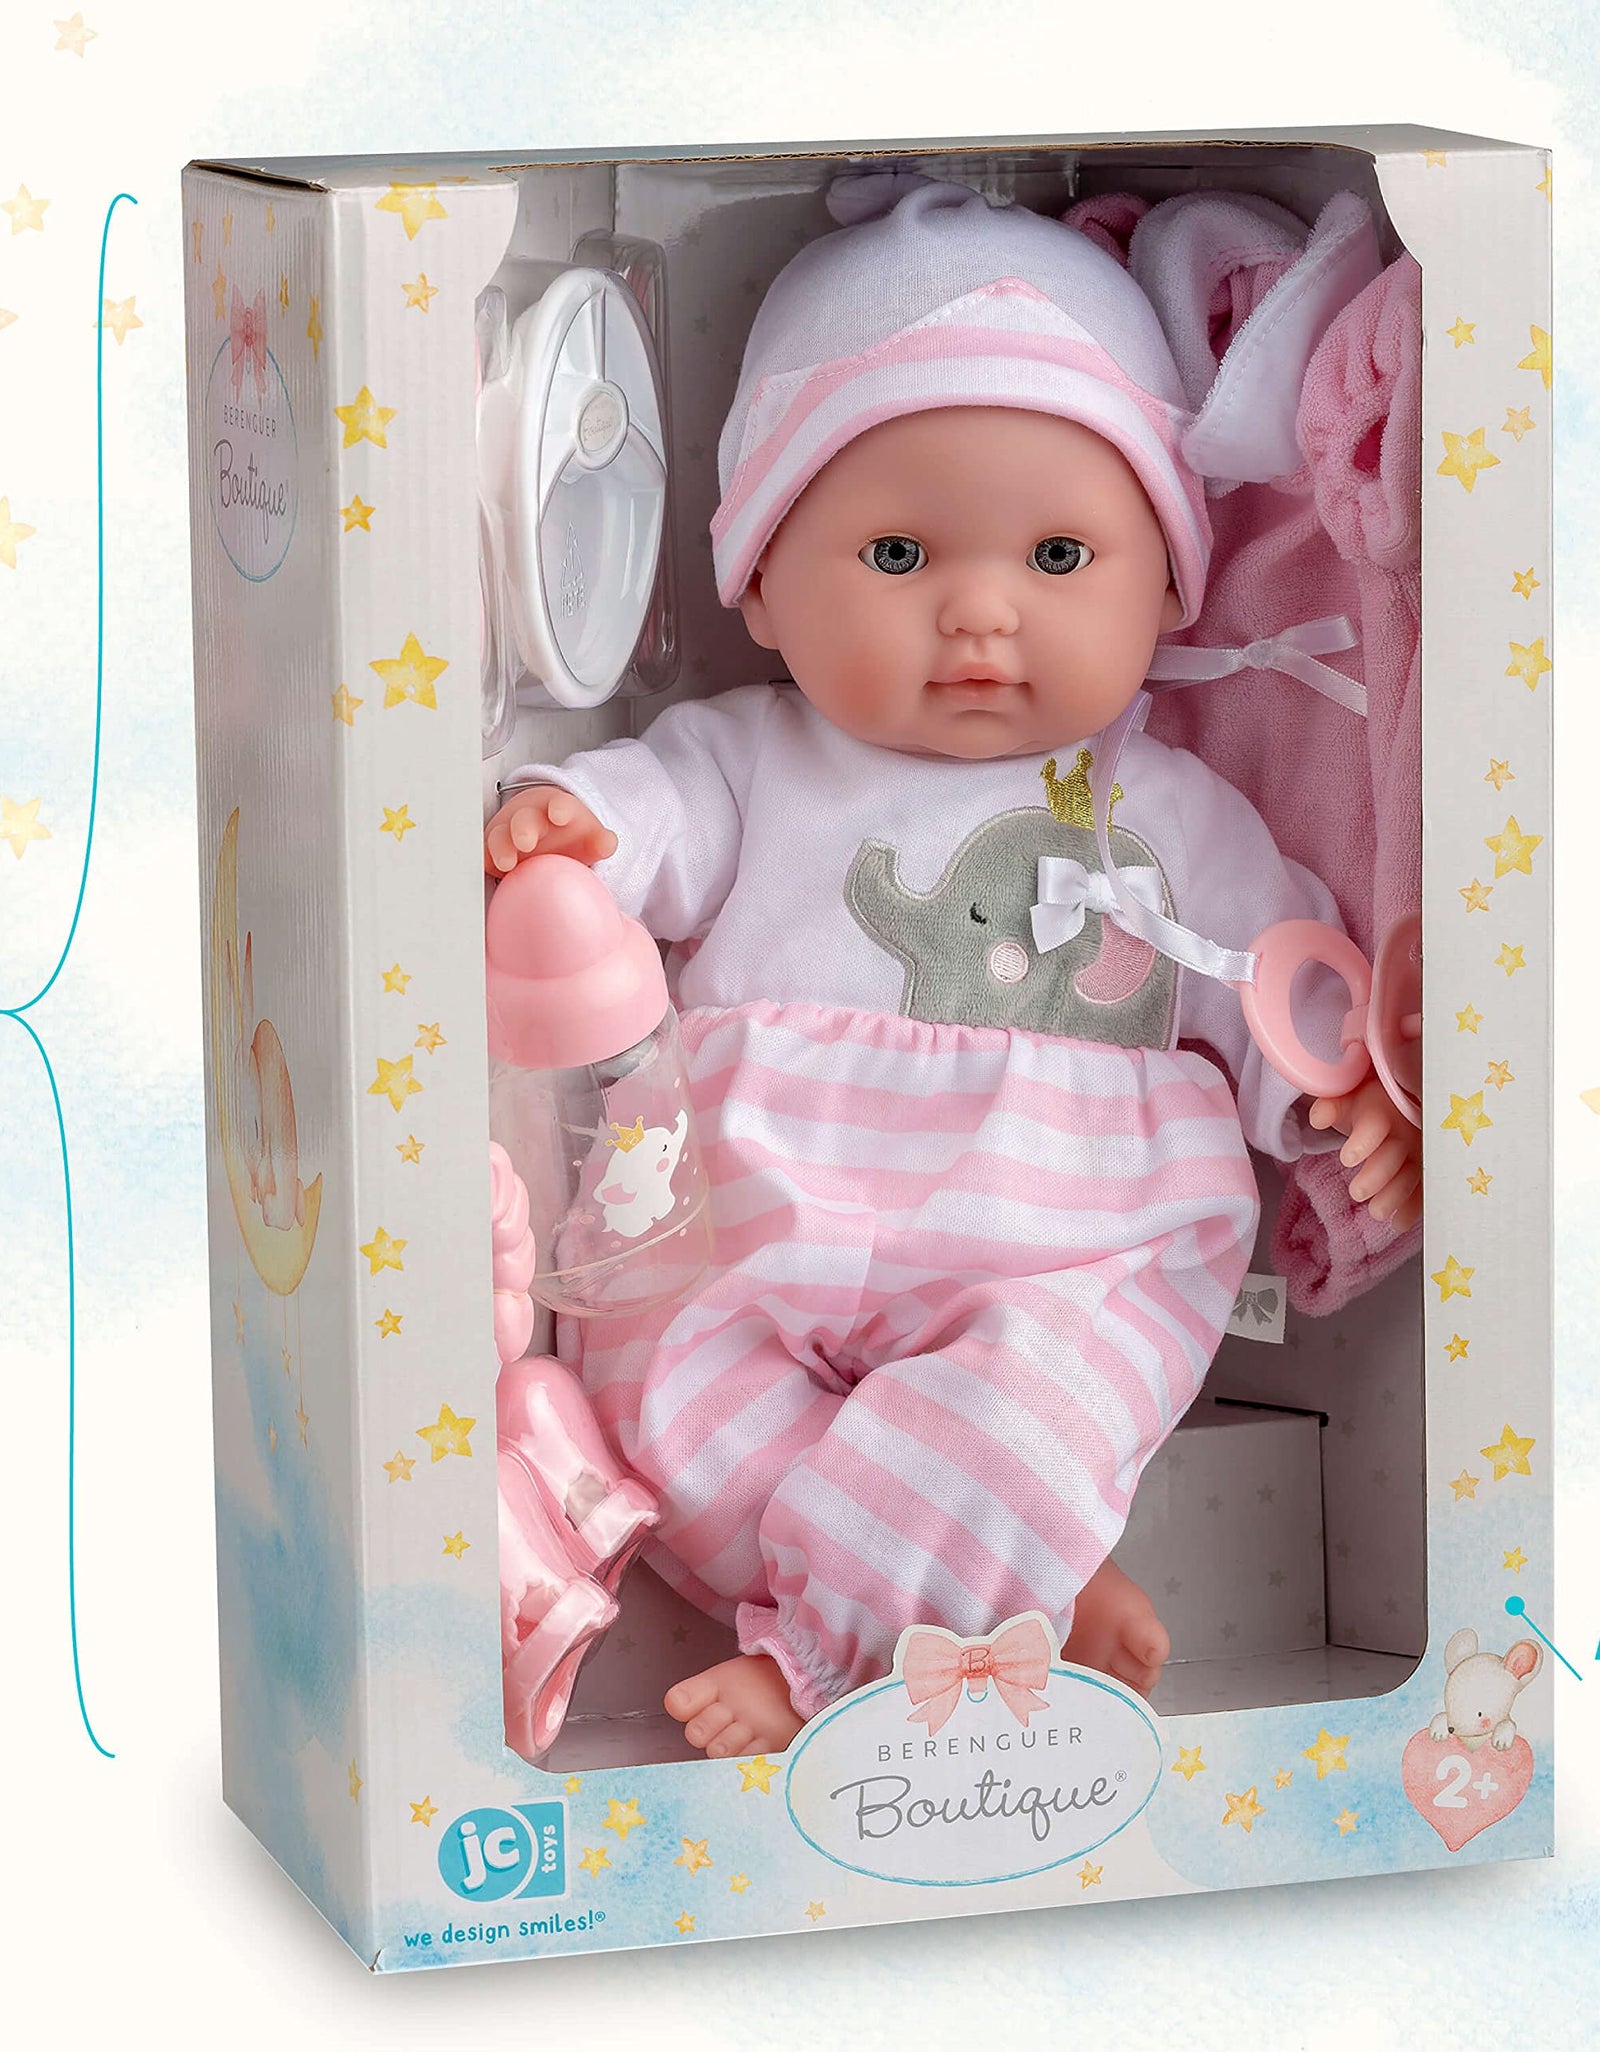 15" Realistic Soft Body Baby Doll with Open/Close Eyes | JC Toys - Berenguer Boutique | 10 Piece Gift Set with Bottle, Rattle, Pacifier & Accessories | Pink | Ages 2+